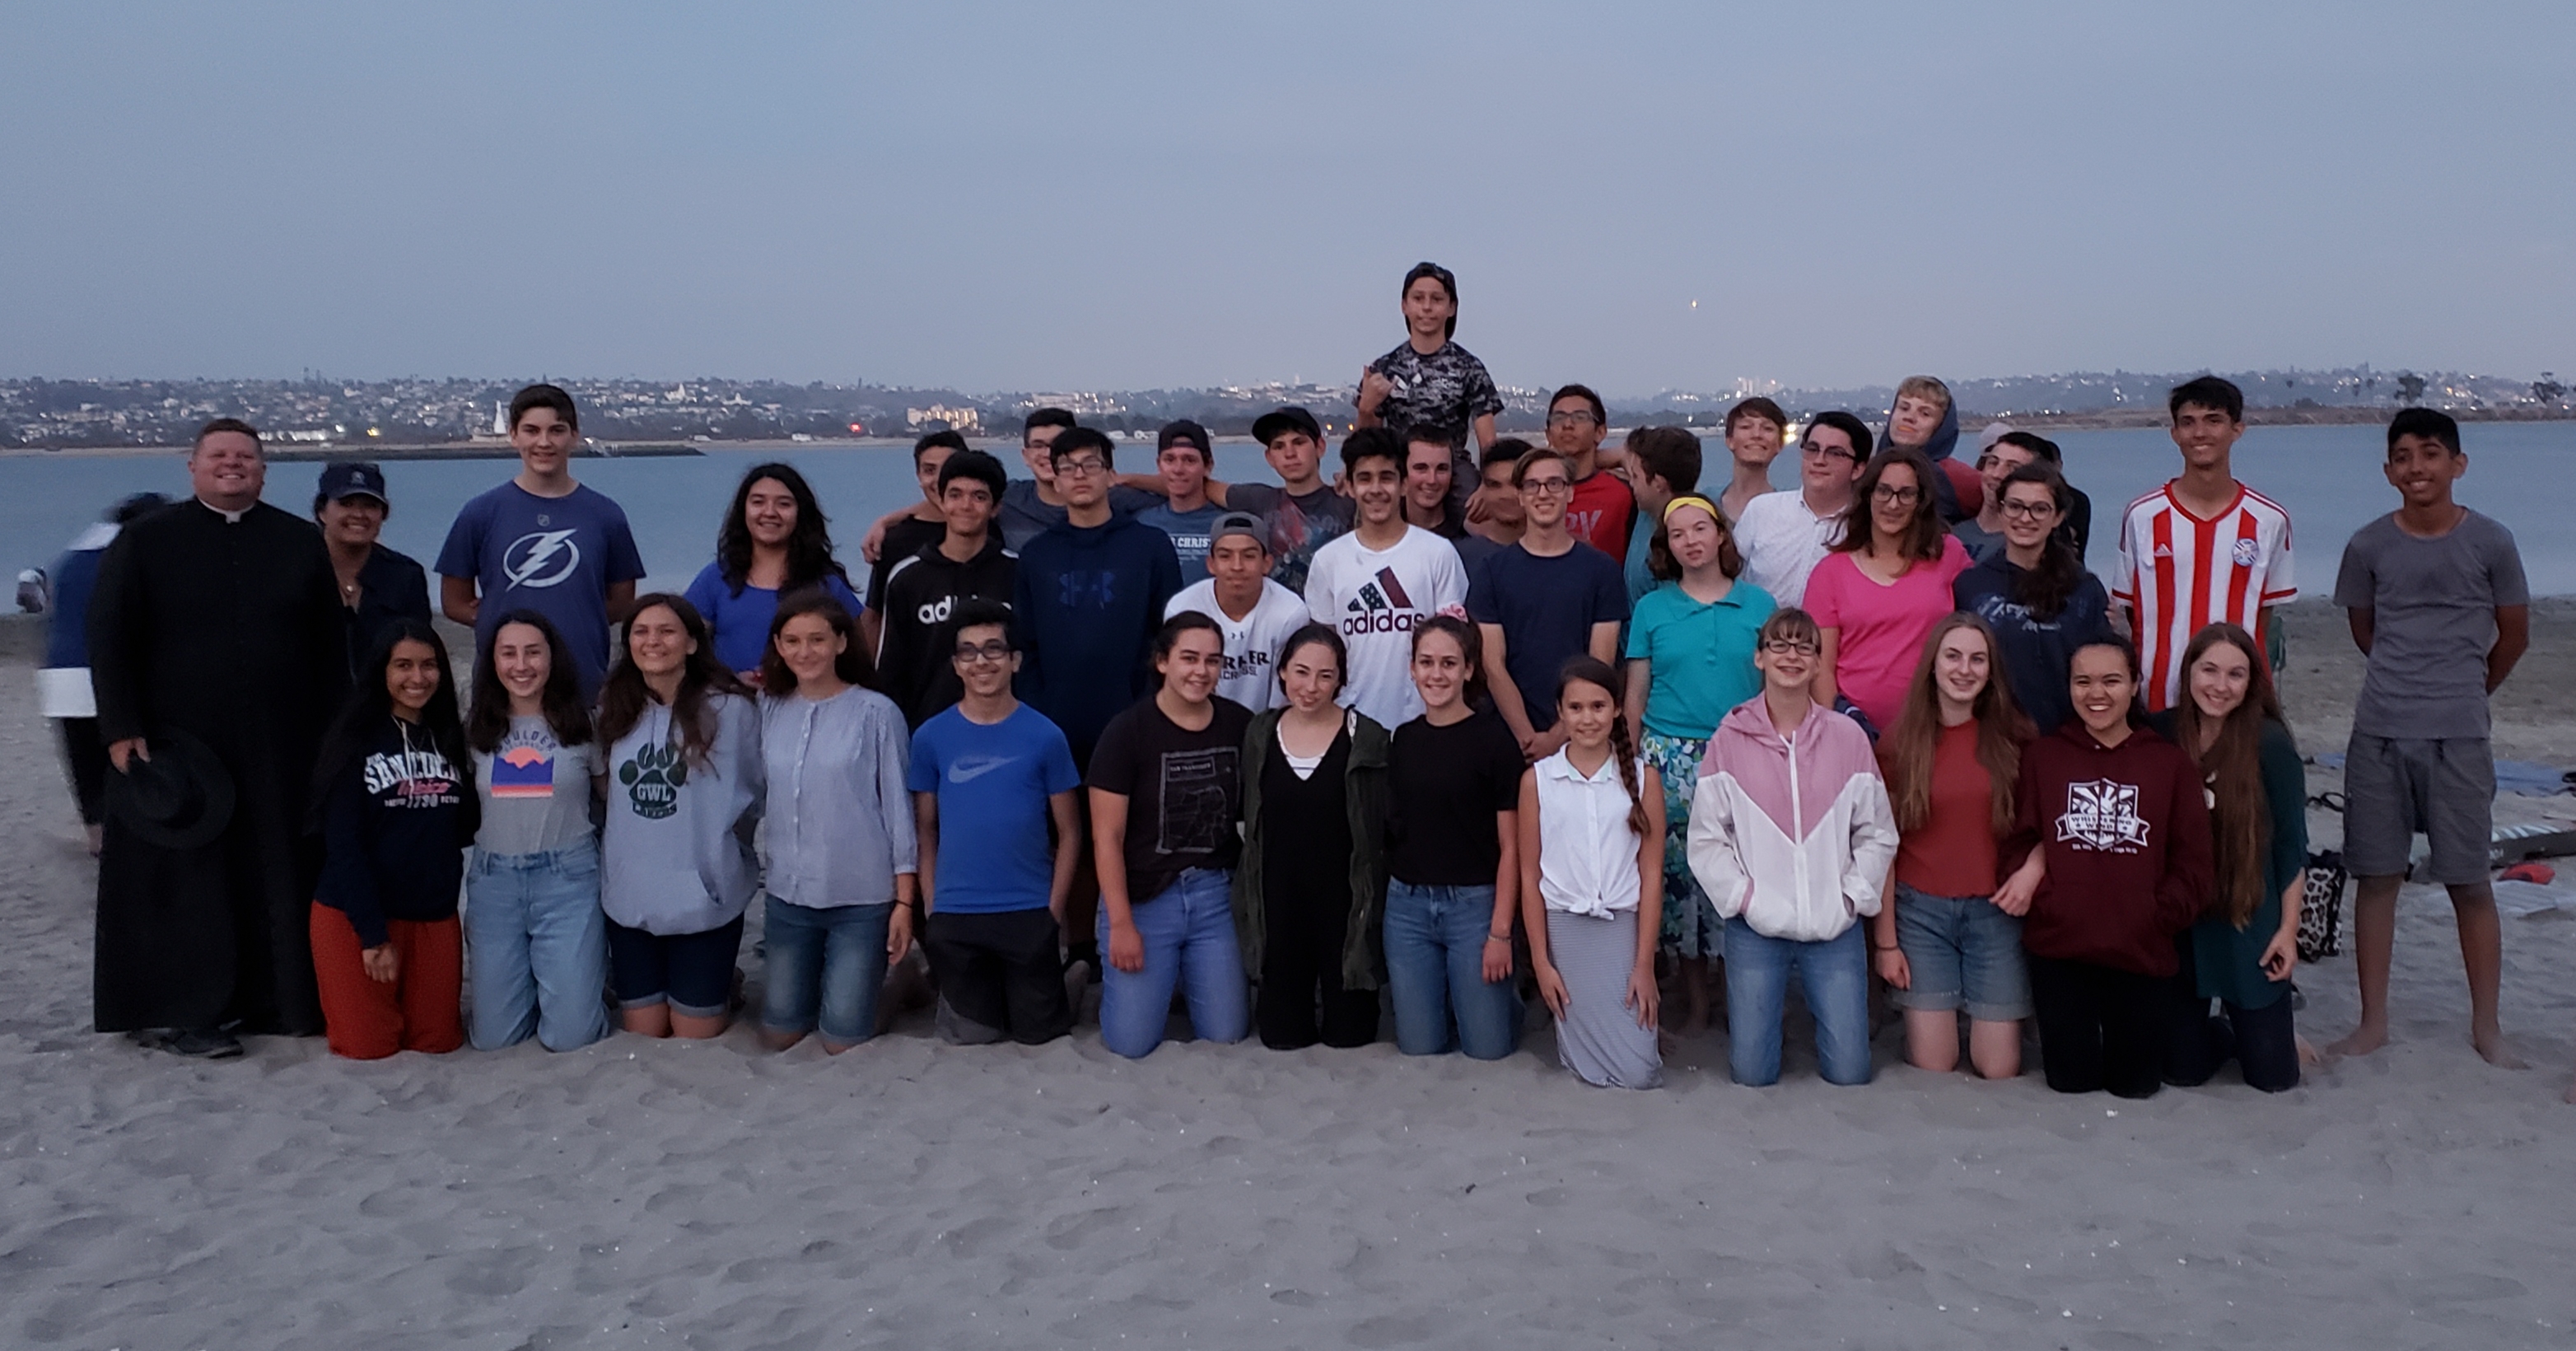 A group picture of the group at one of the beach outings